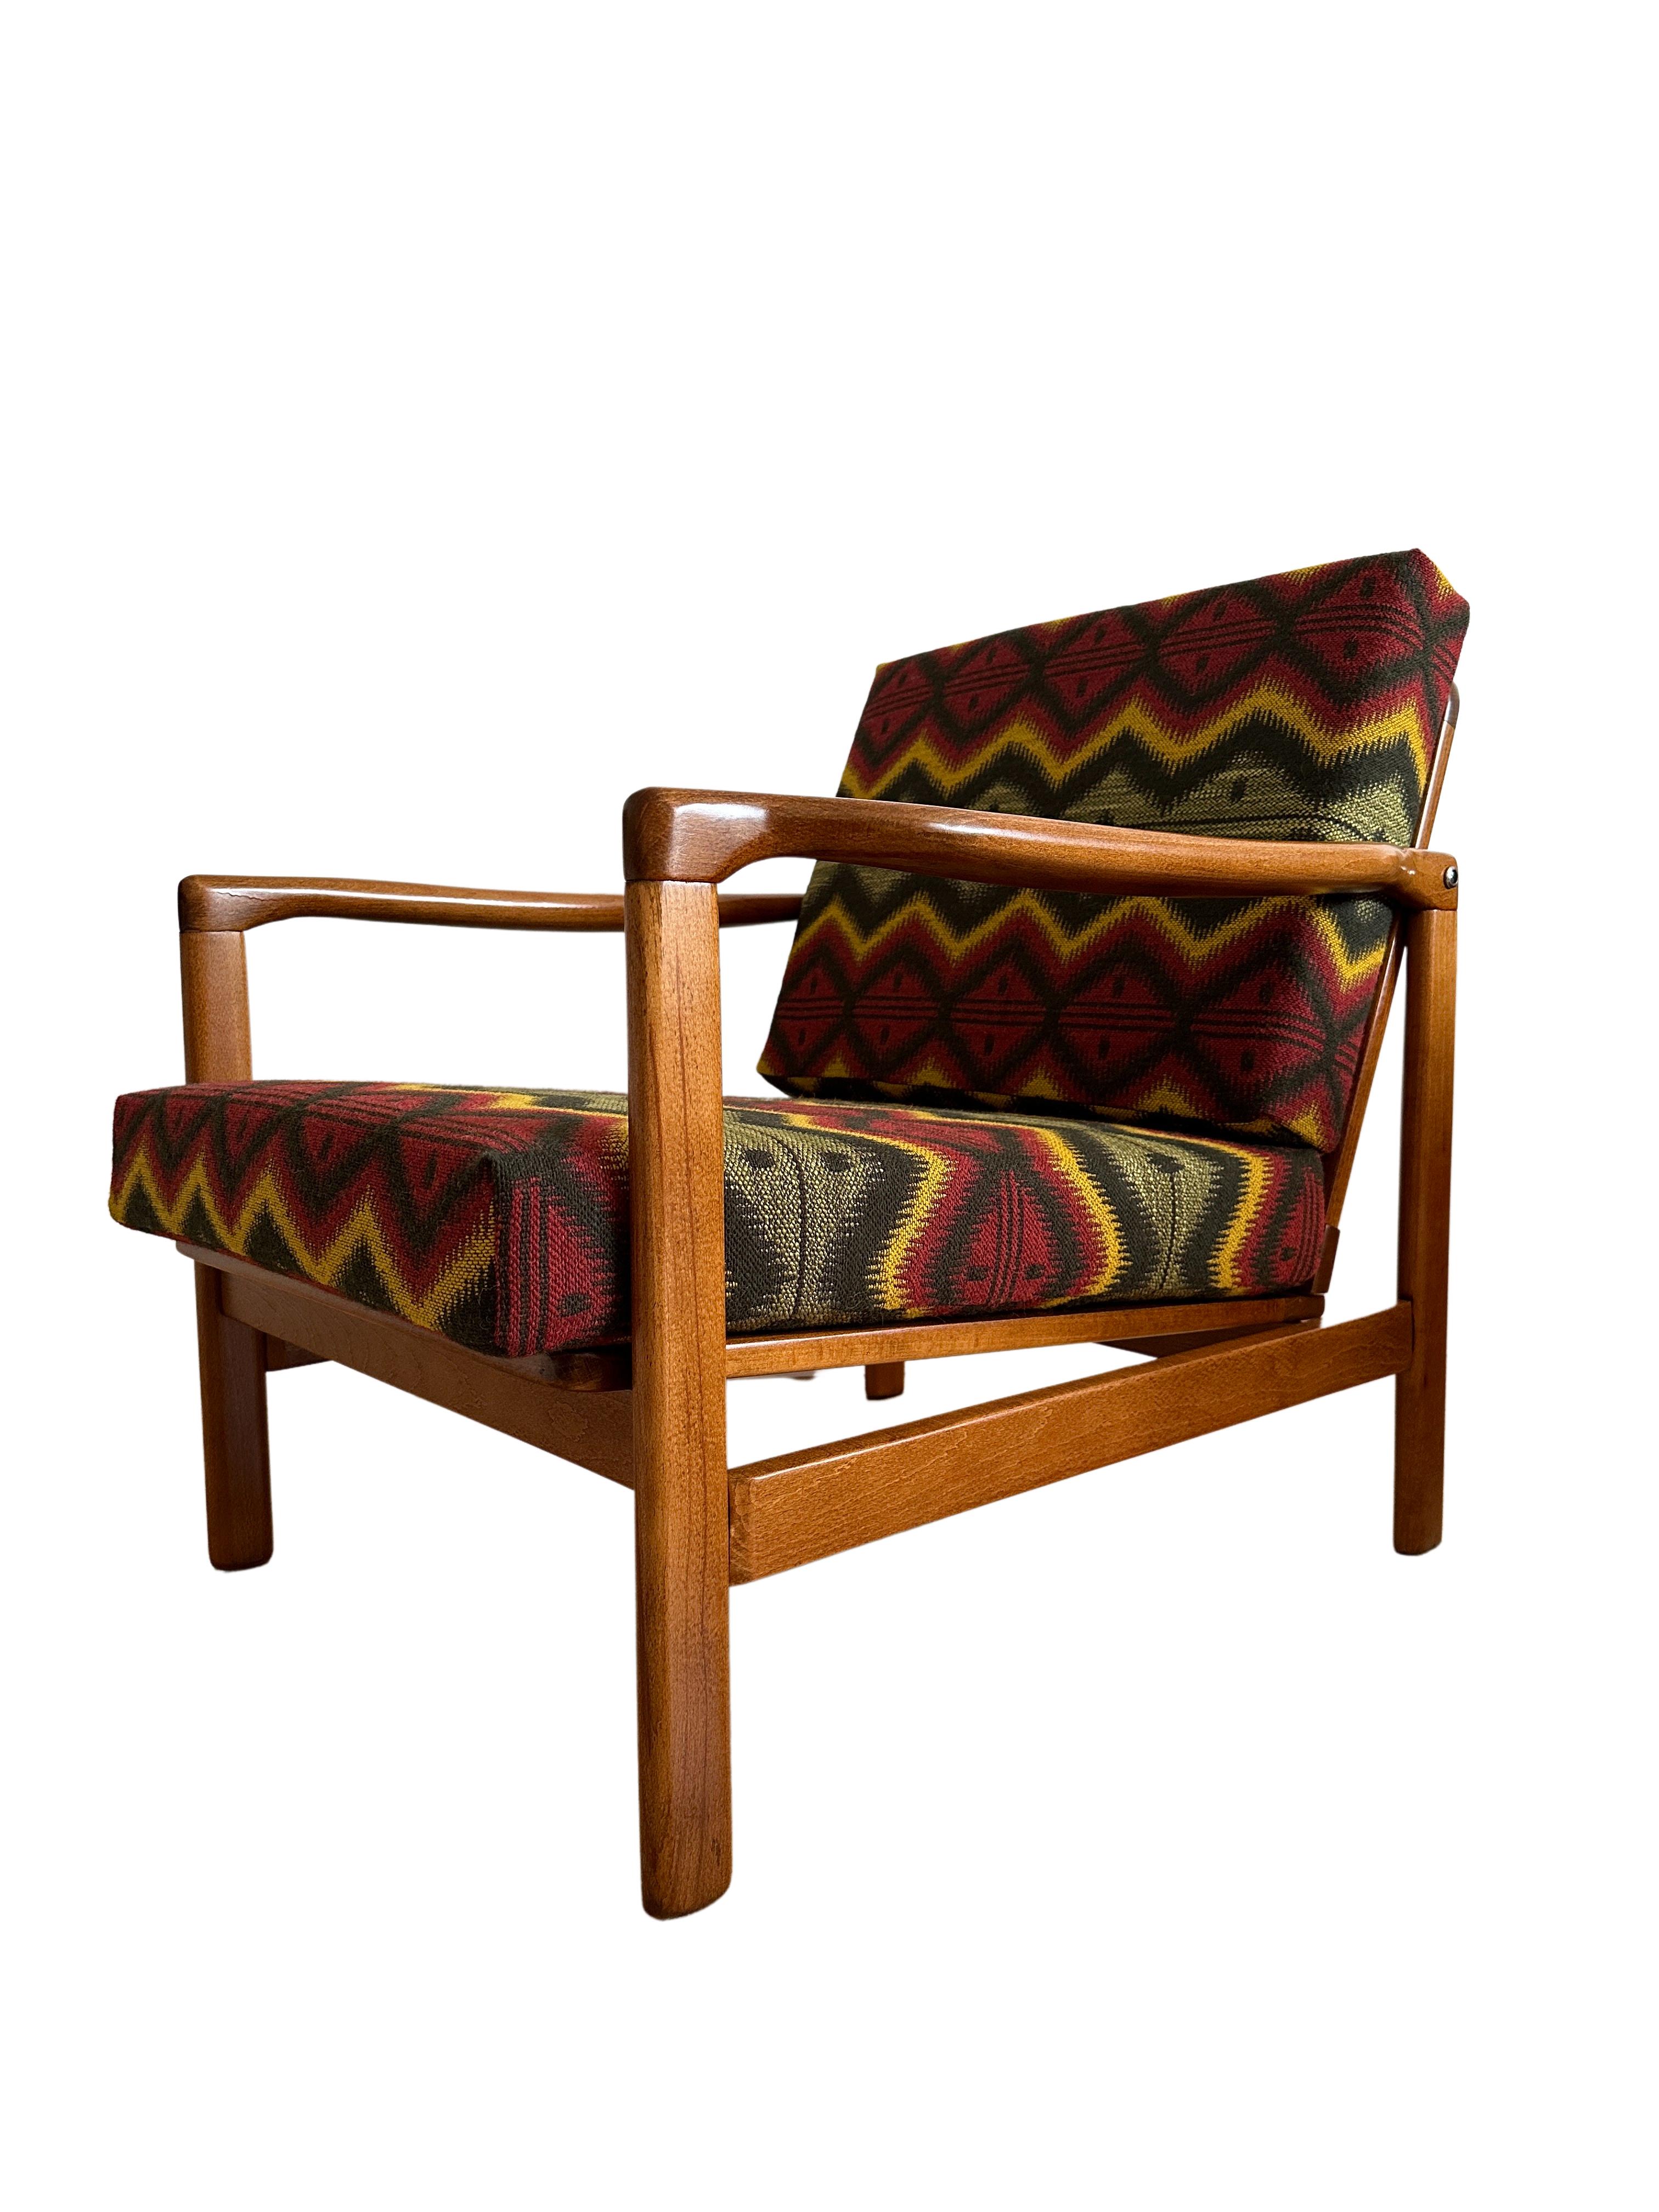 Polish Midcentury Armchair by Zenon Bączyk, Mind the Gap Upholstery, Europe, 1960s For Sale